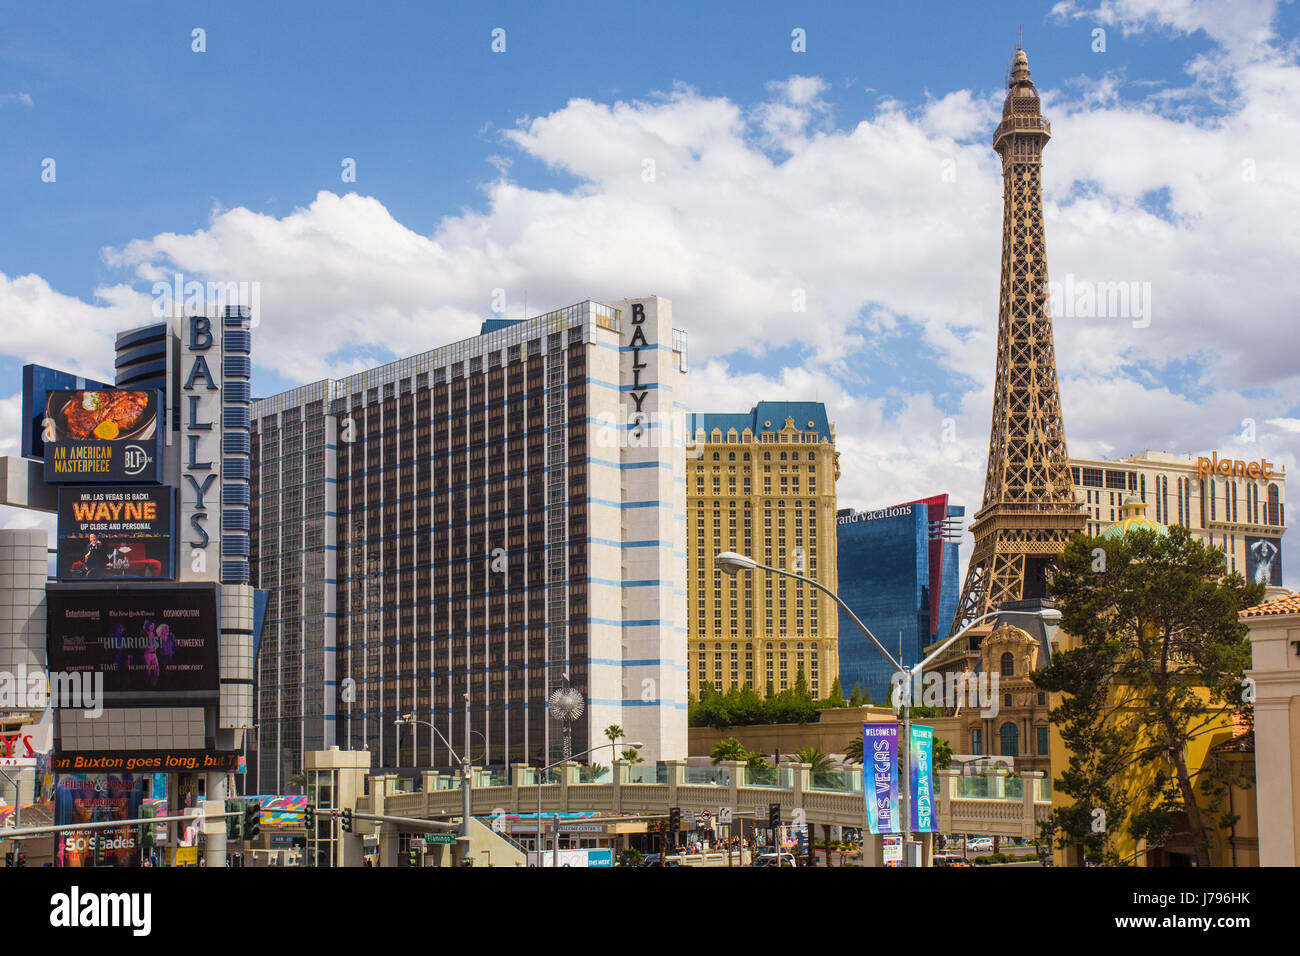 LAS VEGAS, NEVADA - MAY 17, 2017: City of Las Vegas on a sunny day with hotels and resorts casinos in view. Stock Photo